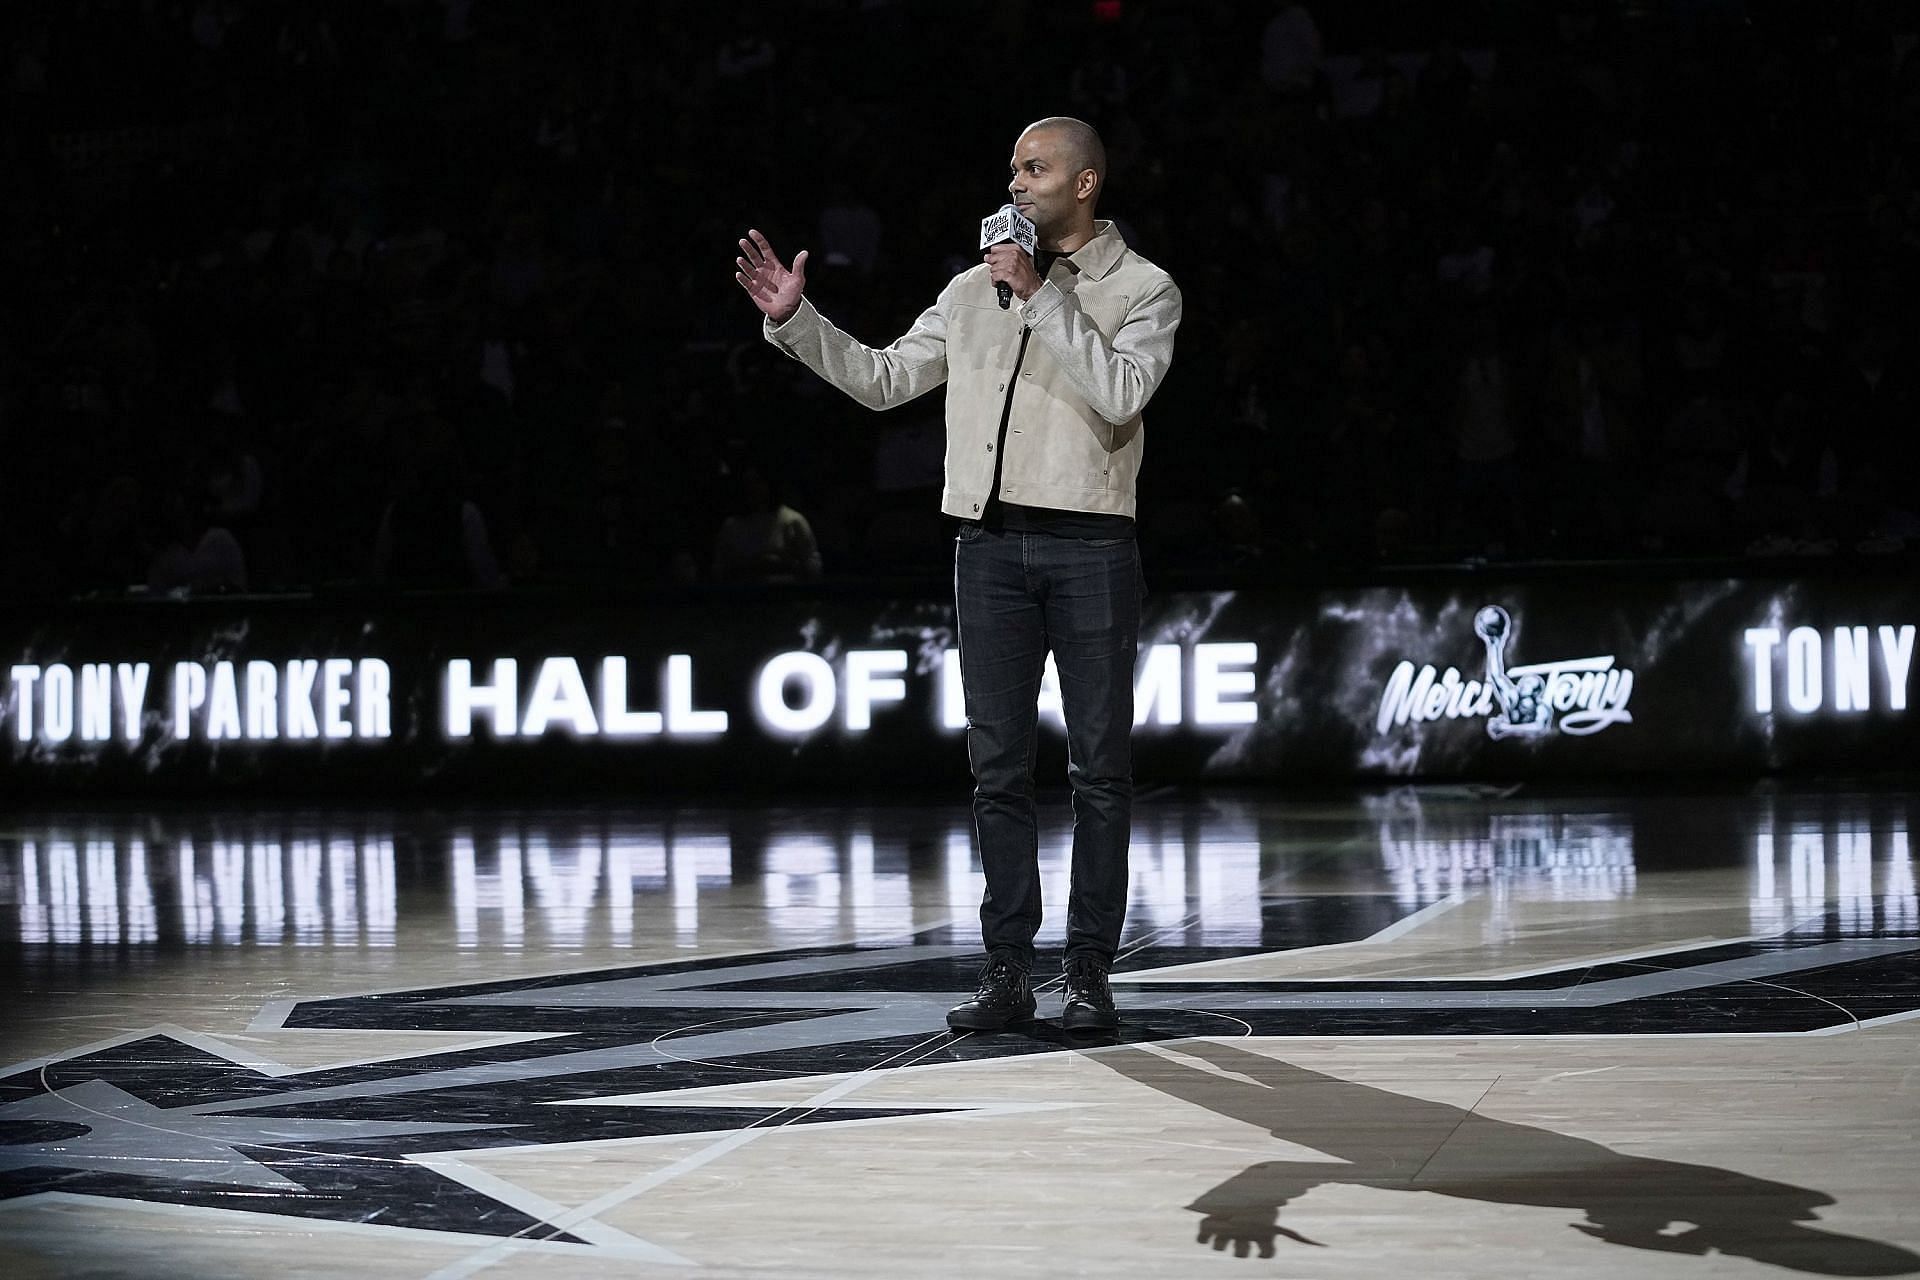 Fans react to Tony Parker being honored by the Spurs